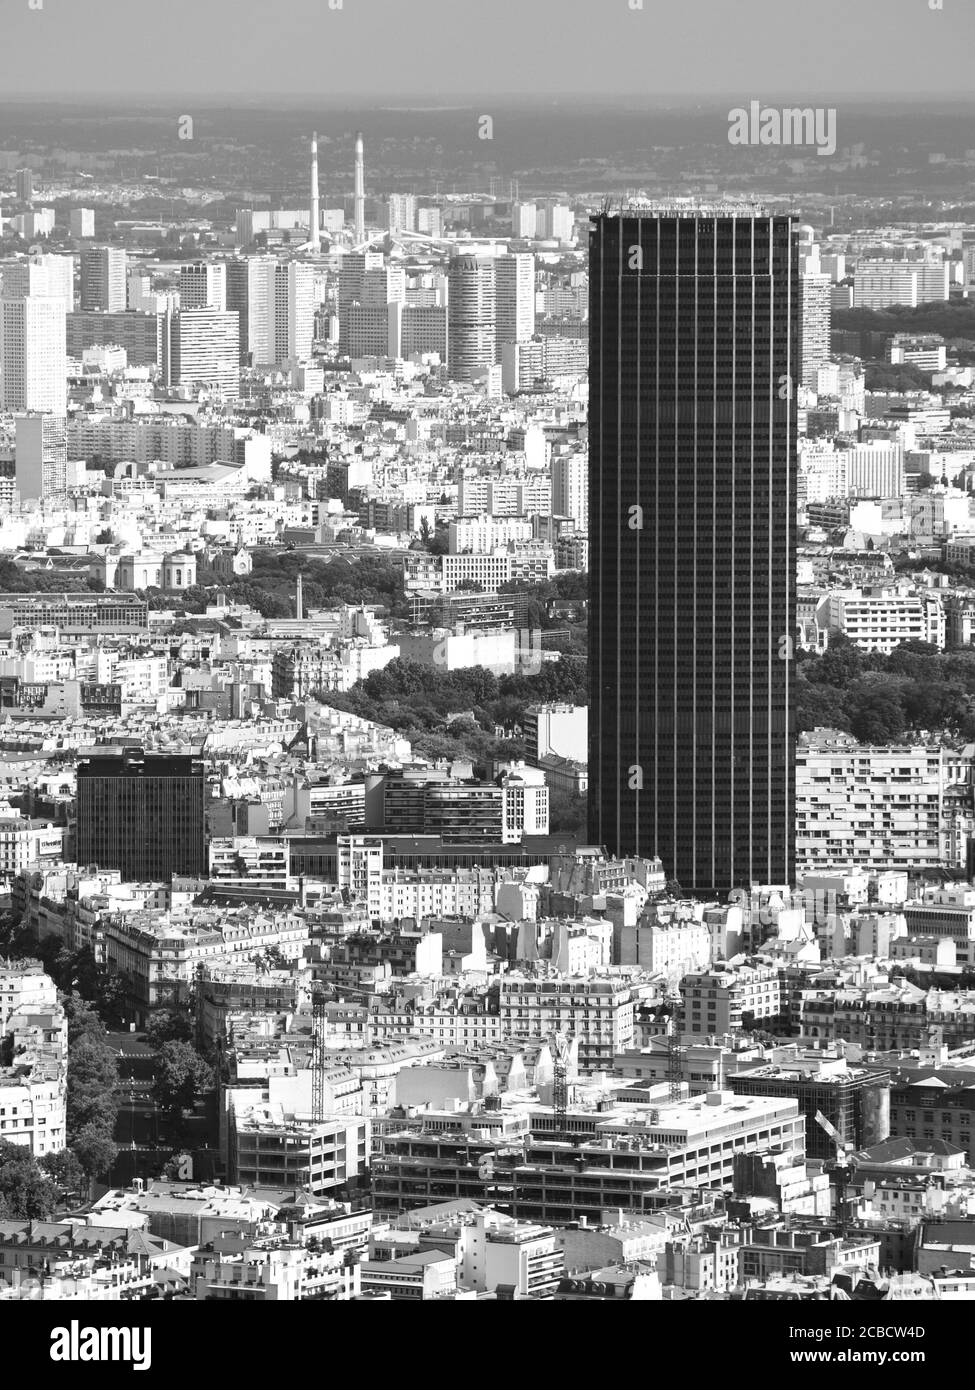 View of Montparnasse Tower Skyscraper from Eiffel Tower in Paris, France Stock Photo